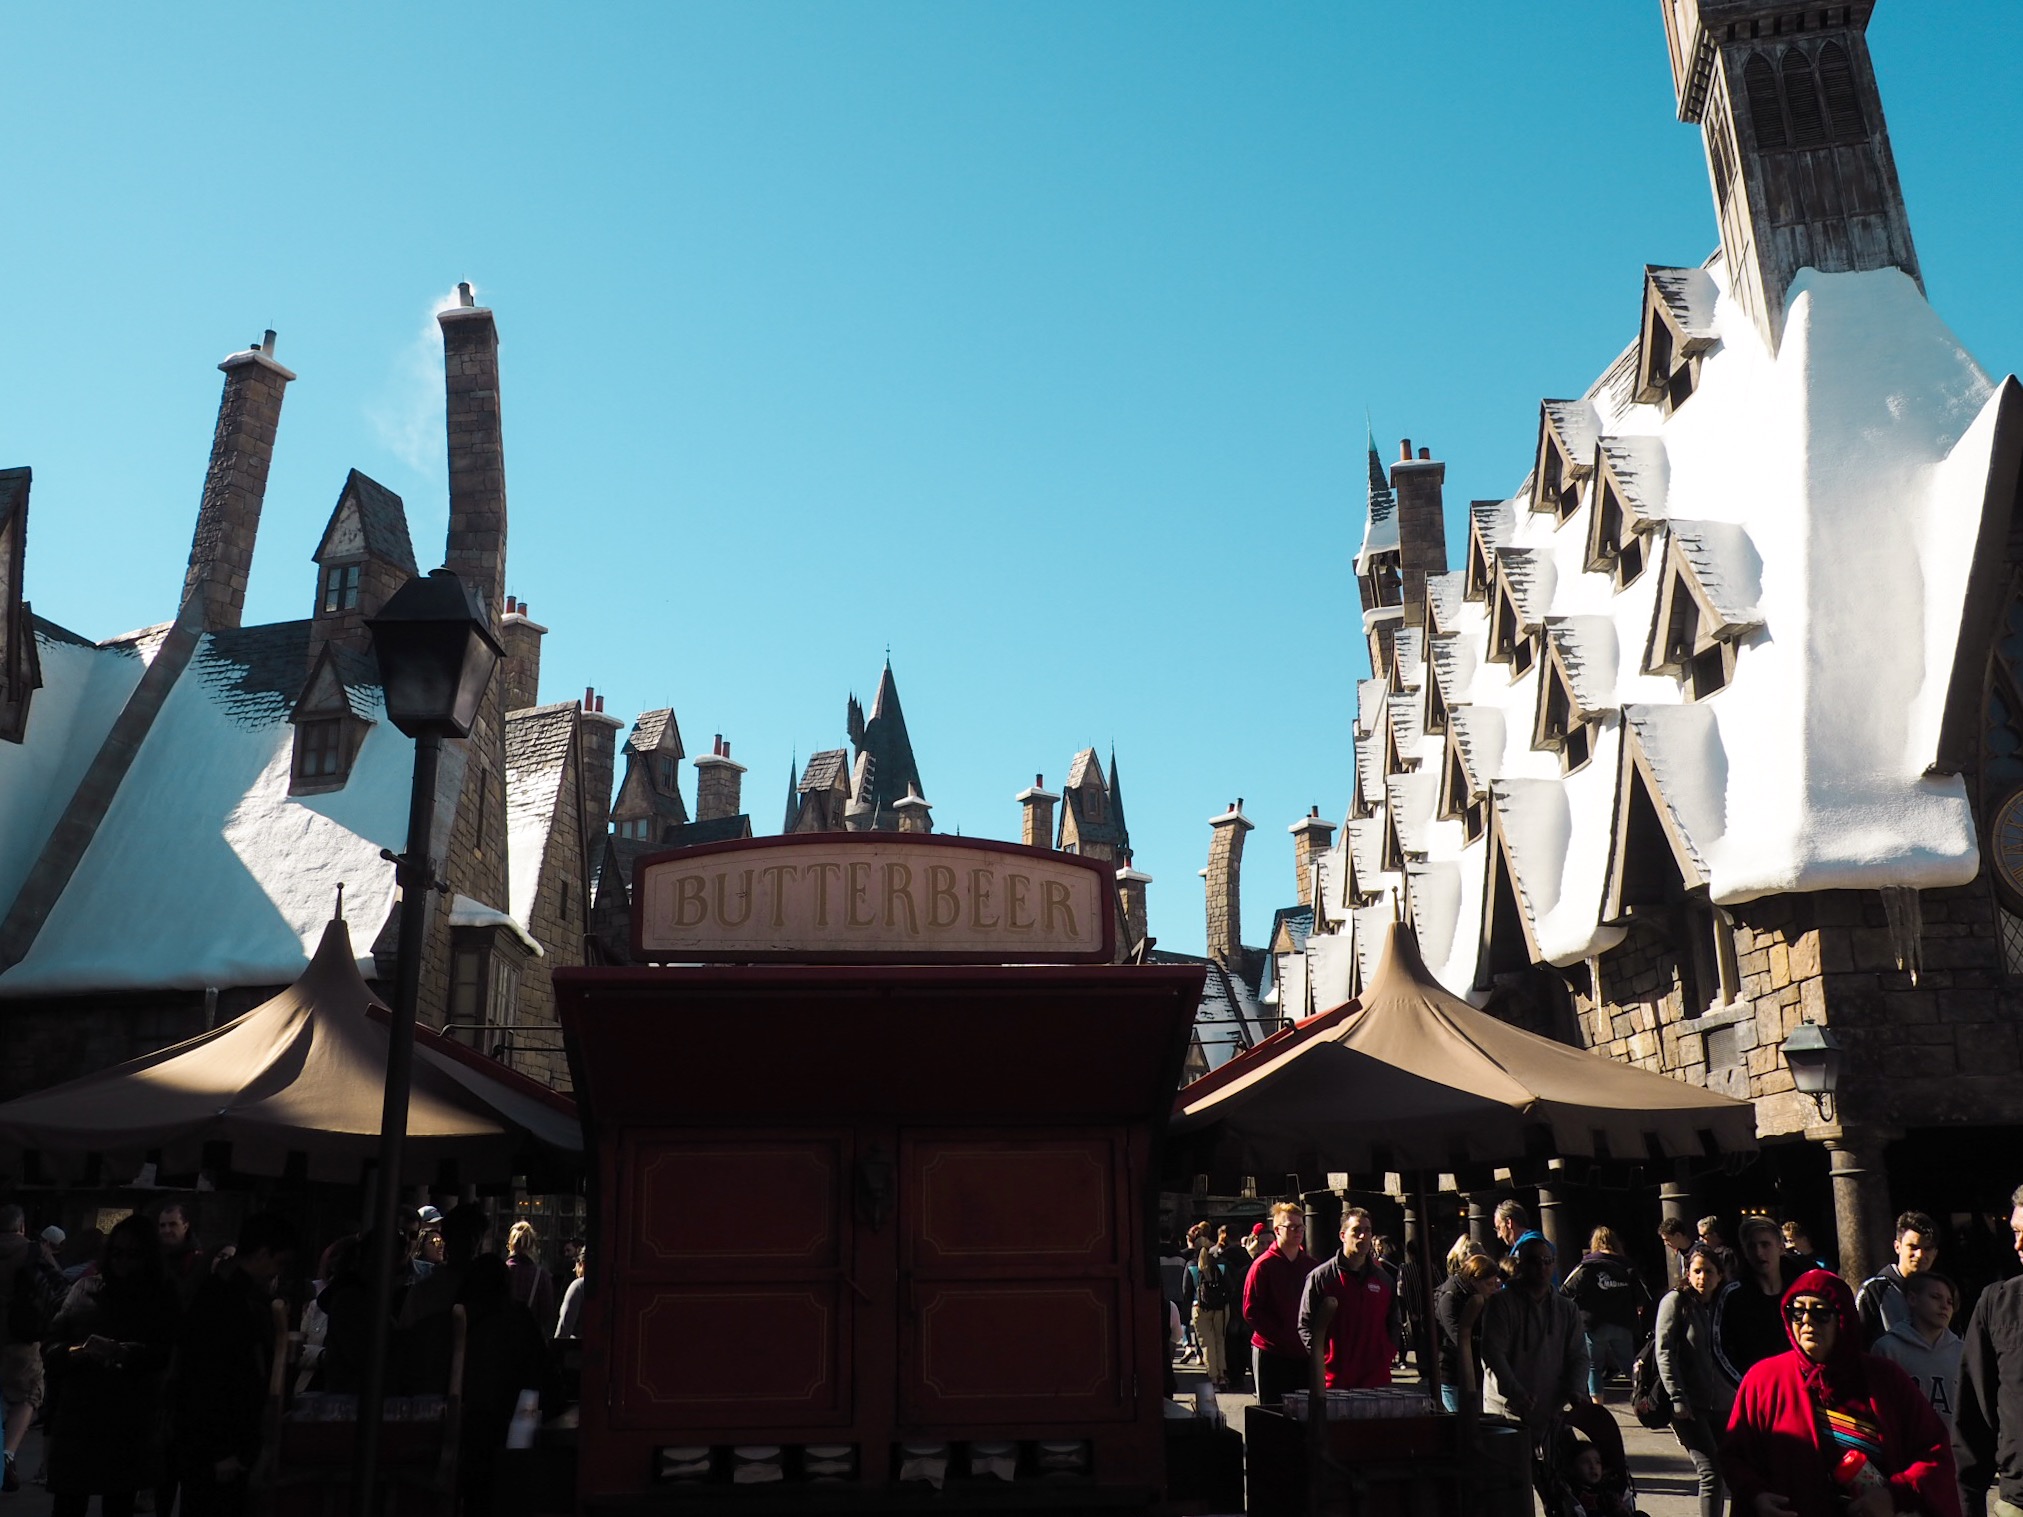 Universal's Islands of Adventure Hogsmeade Village - a three day itinerary guide to the best Orlando theme parks